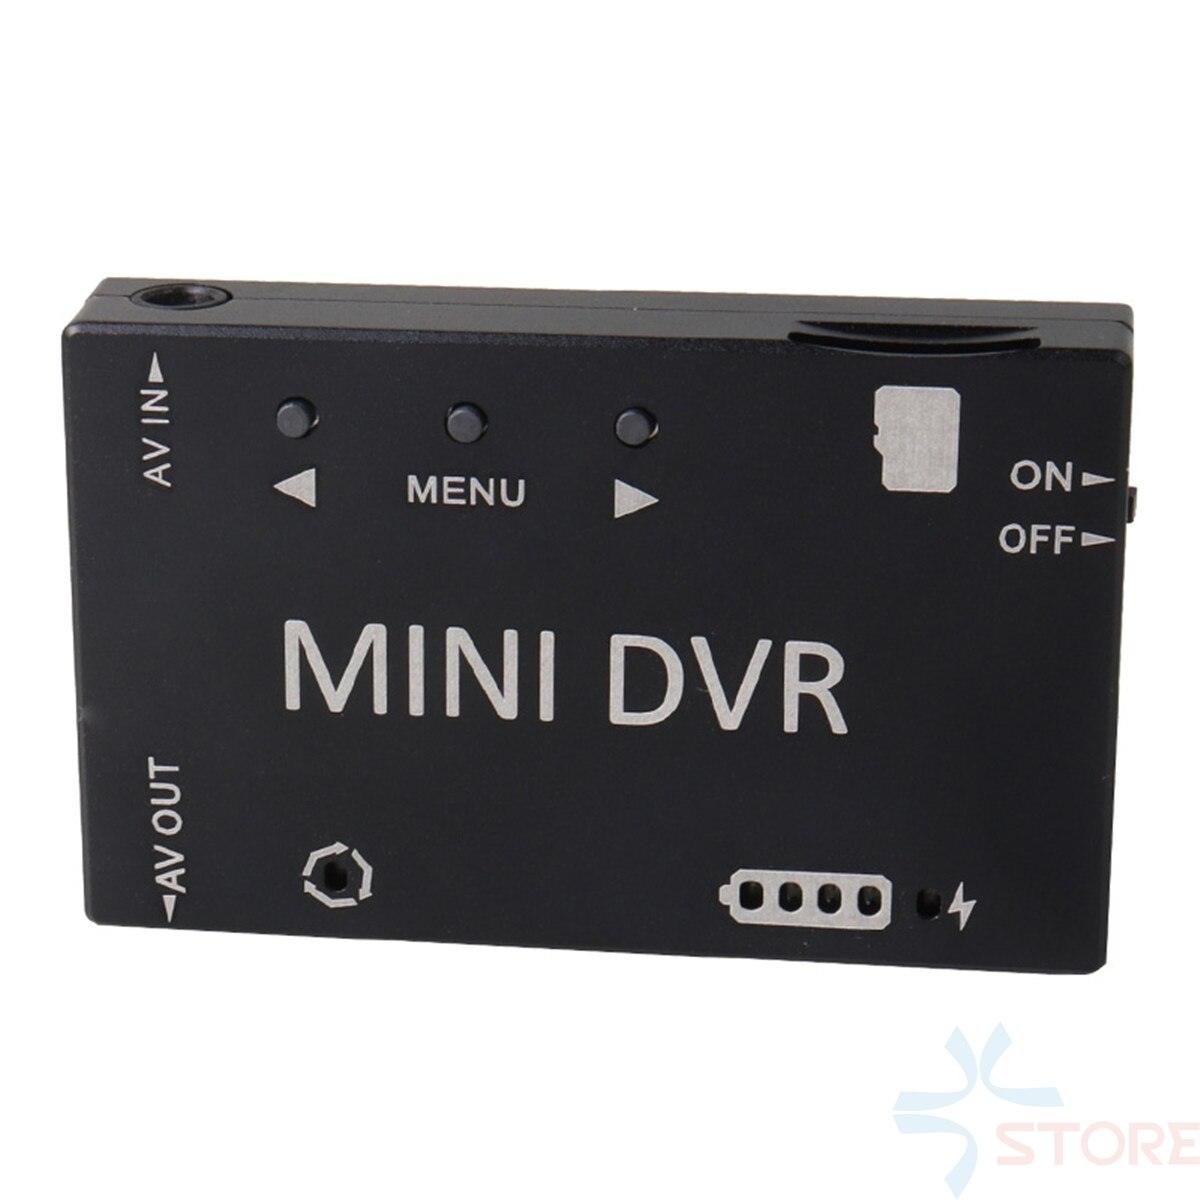 Mini FPV DVR Module NTSC/PAL Switchable Built-in Battery Video Audio FPV Recorder for RC Models Racing FPV Drone - RCDrone